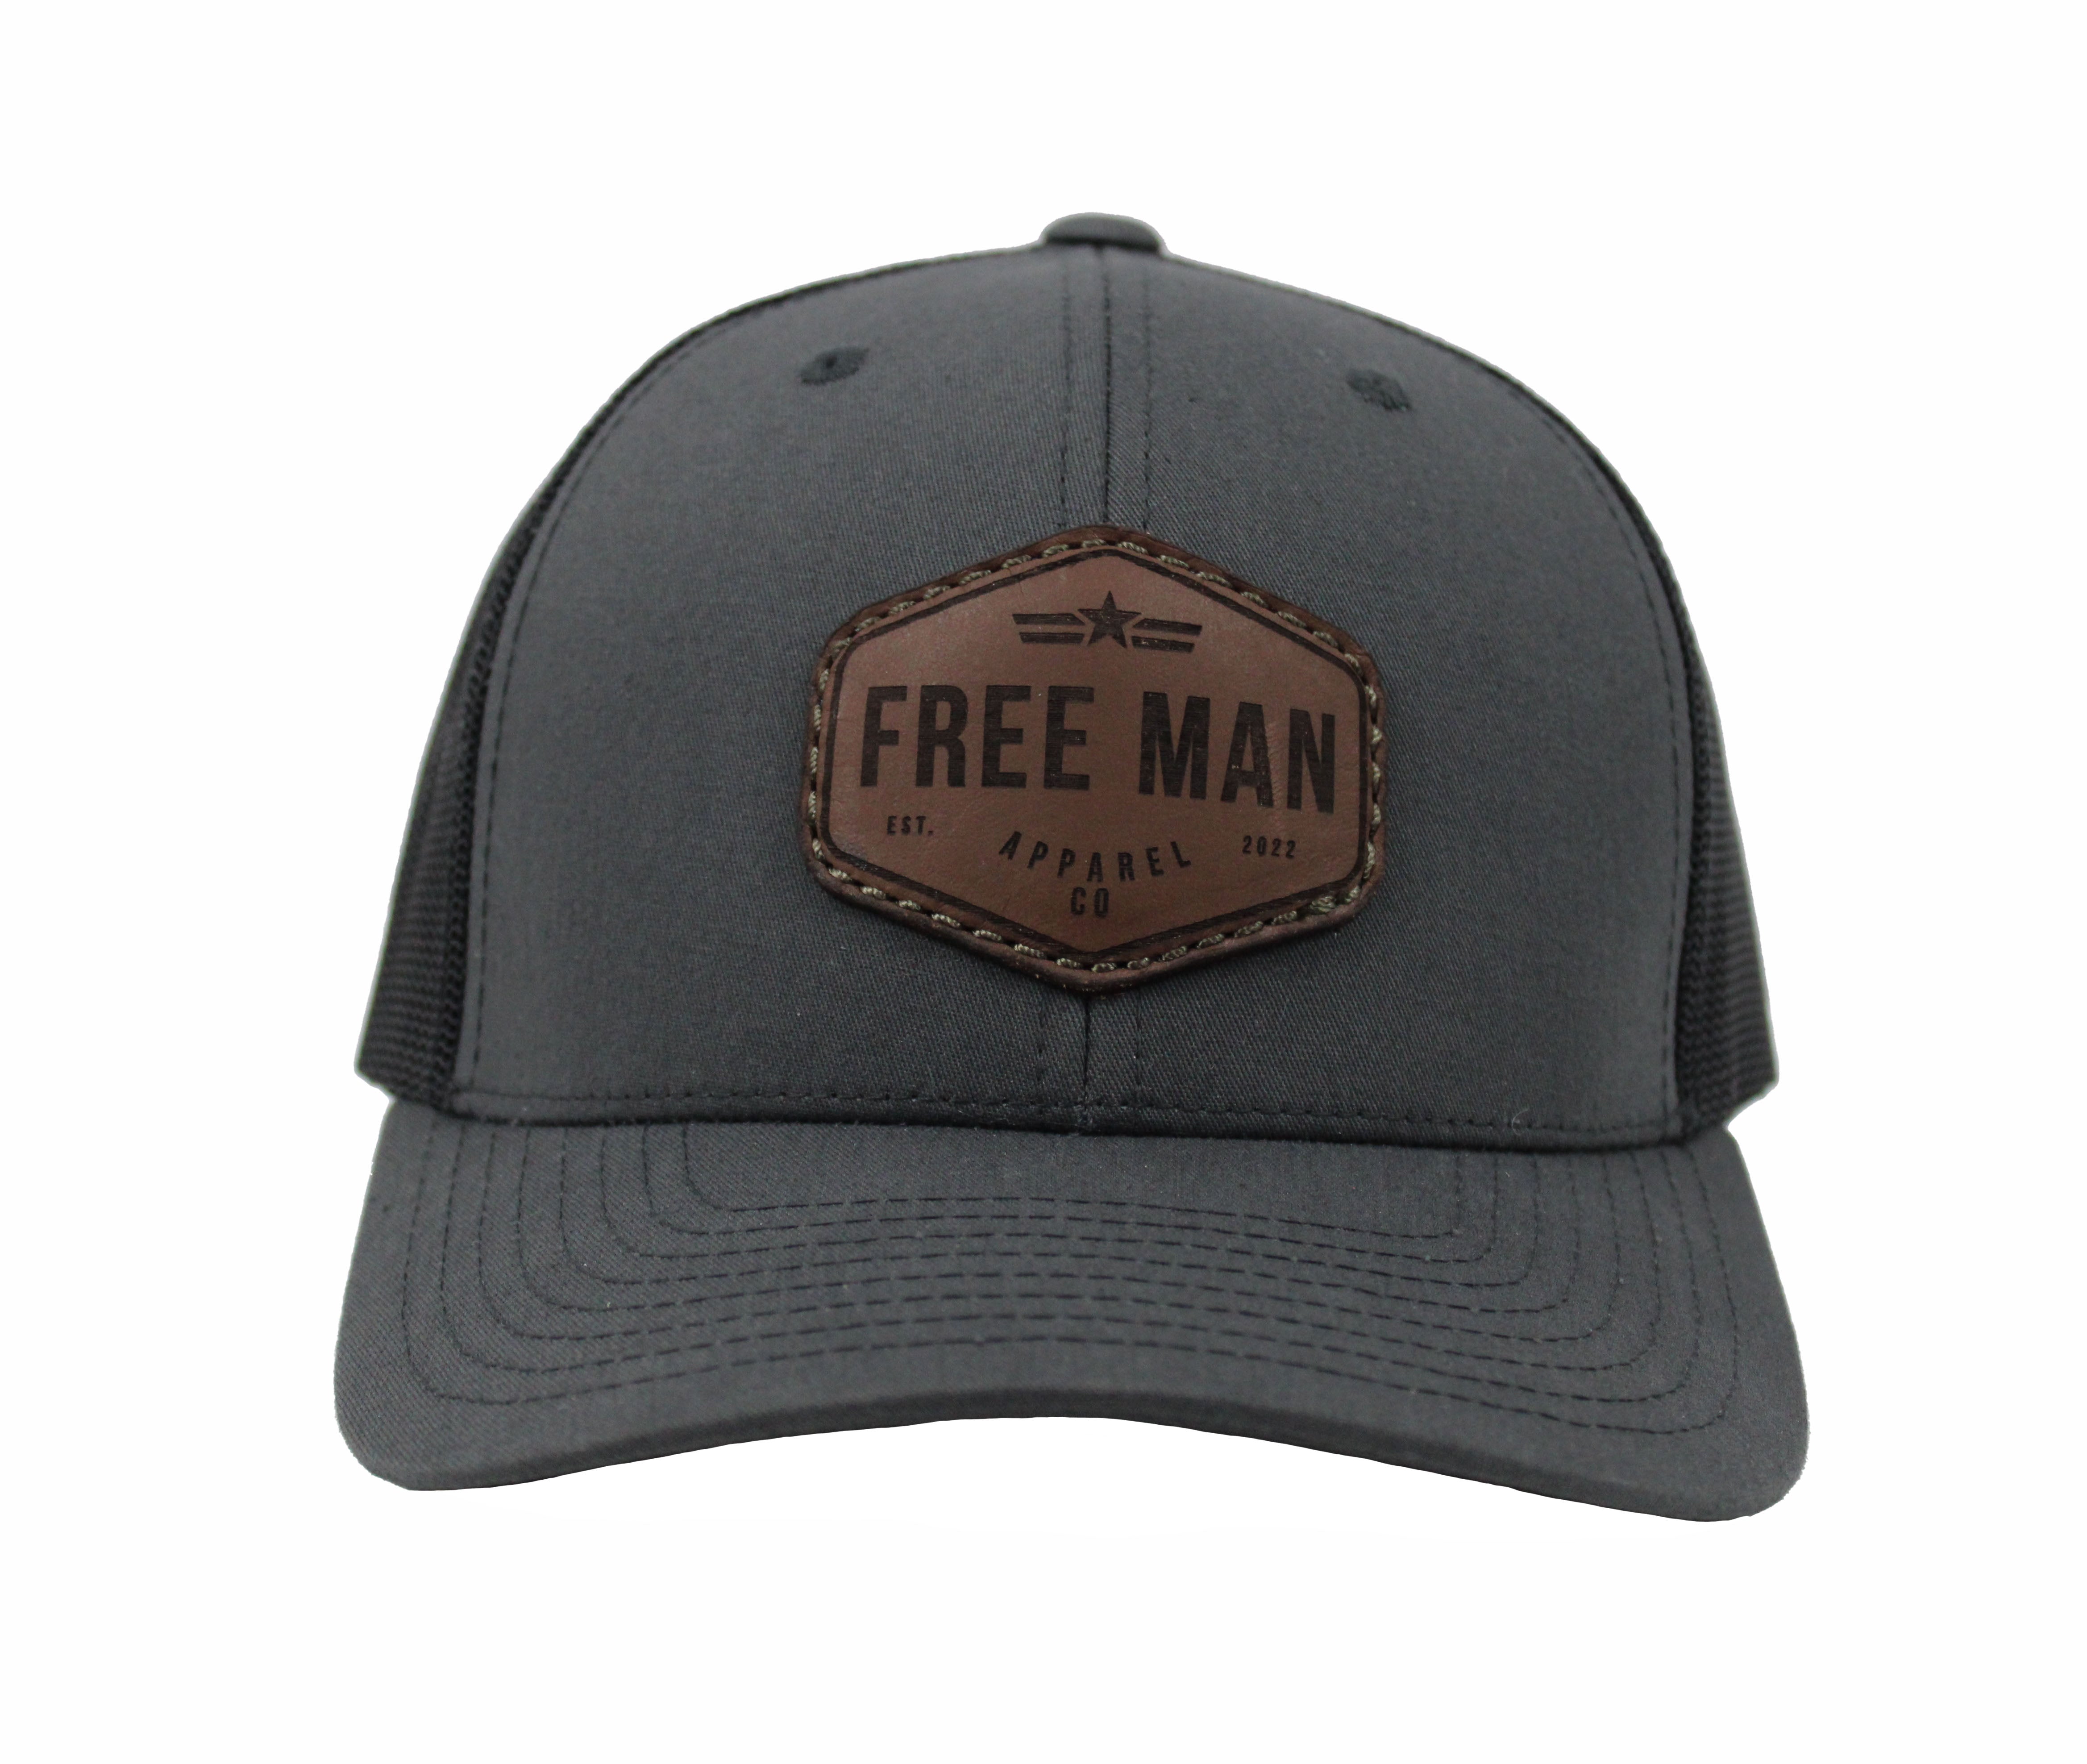 Charcoal The Free – Trucker Founder in Apparel Man Retro